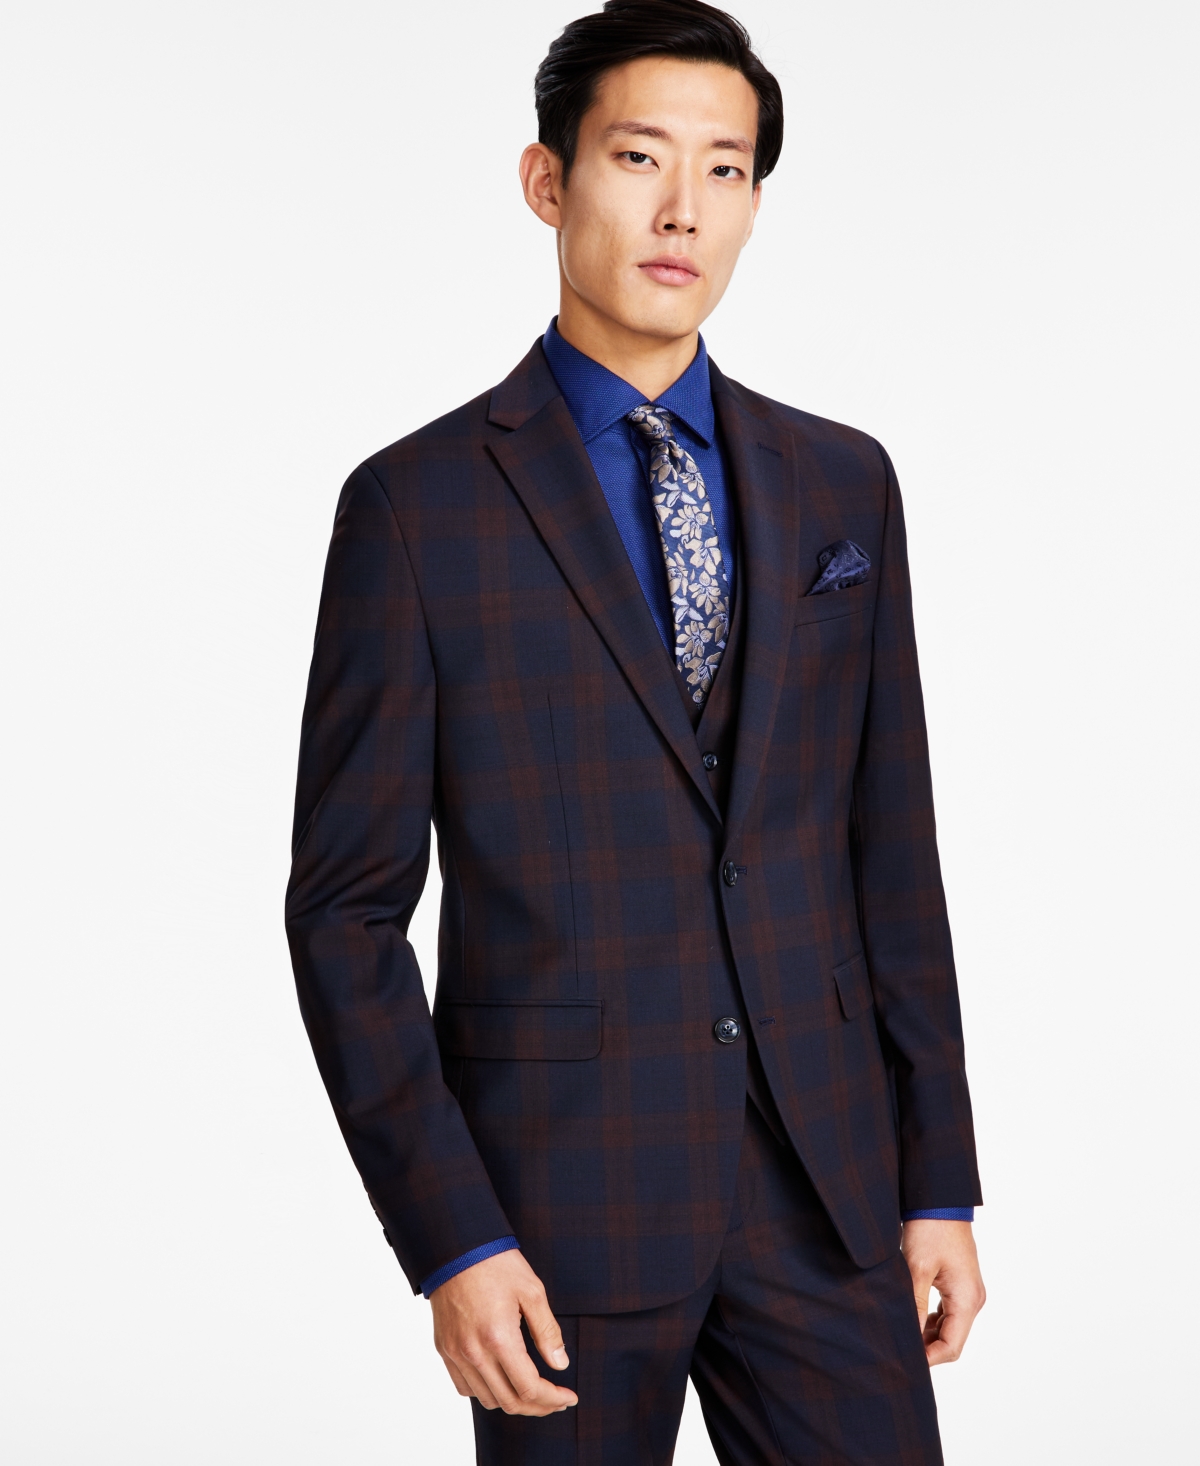 Men's Slim-Fit Suit Jackets, Created for Macy's - Brown